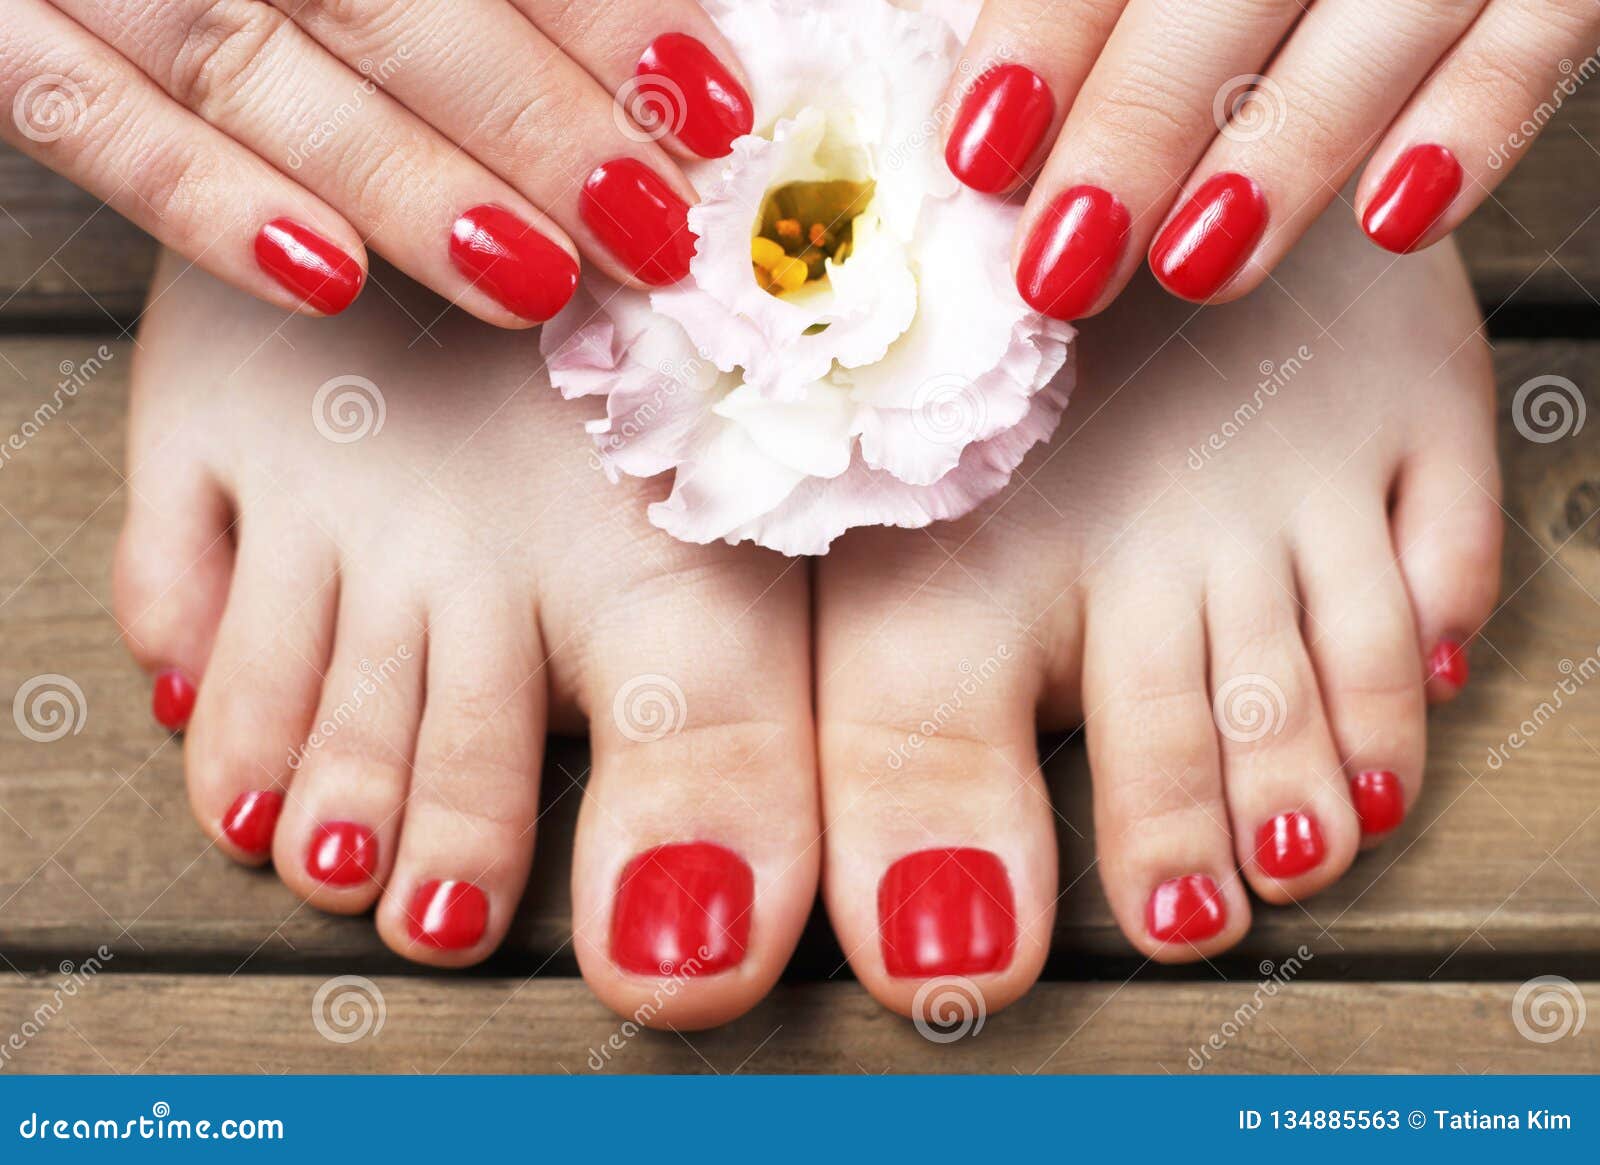 planer sjækel format Red Manicure and Pedicure with Flower Close-up, on a Wooden Background, Top  View Stock Image - Image of healthy, manicure: 134885563